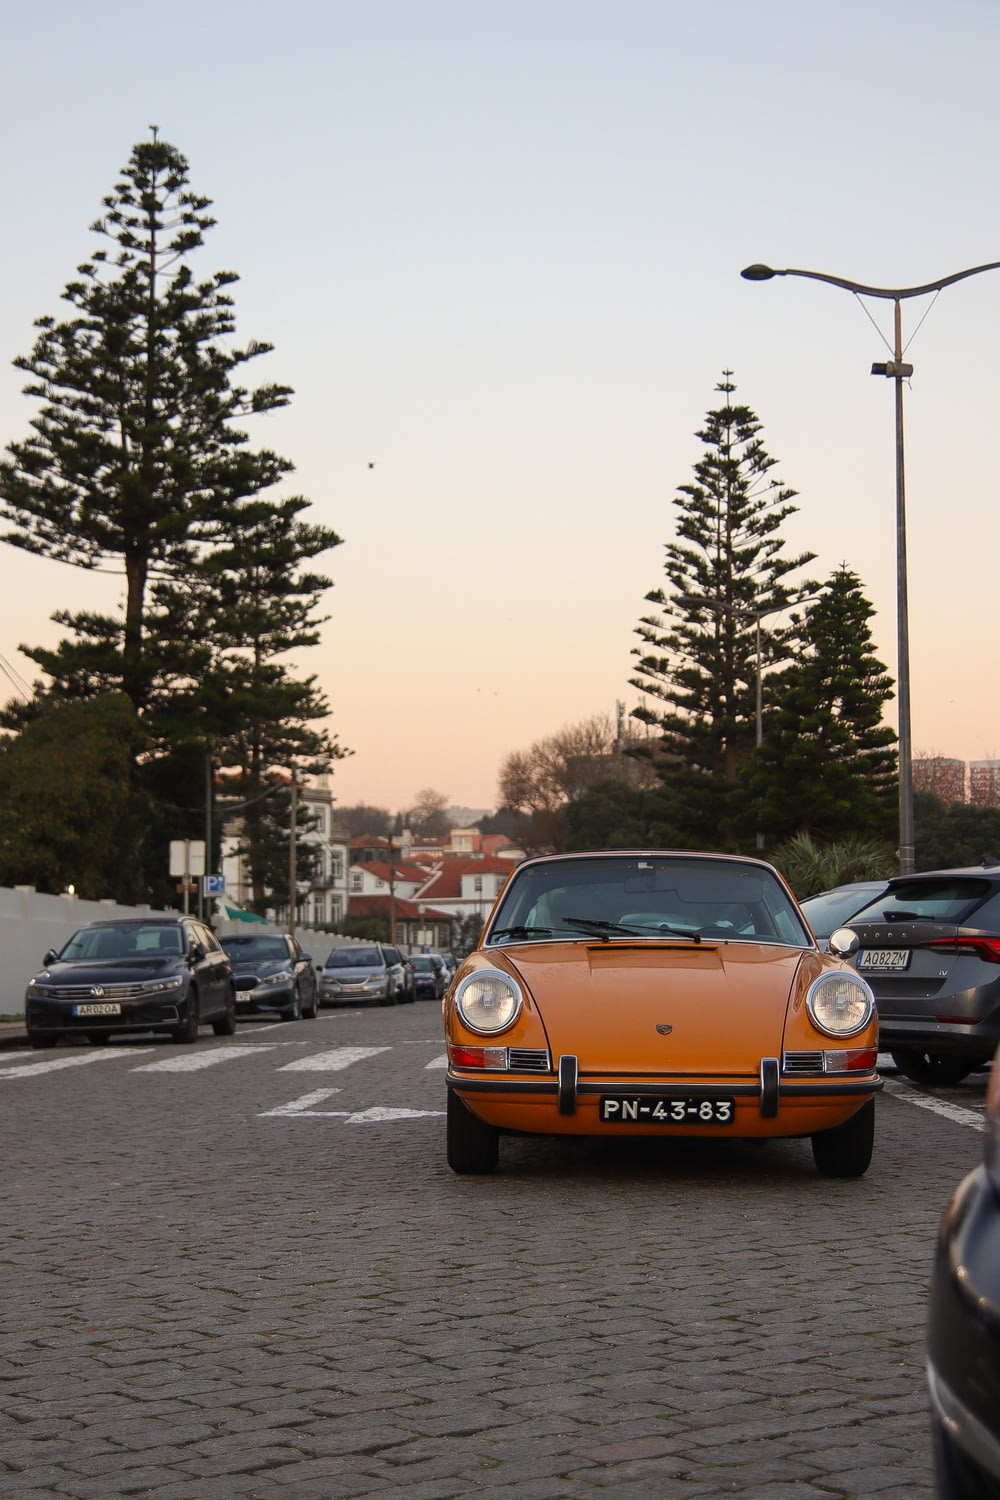 an orange car is parked in a parking lot